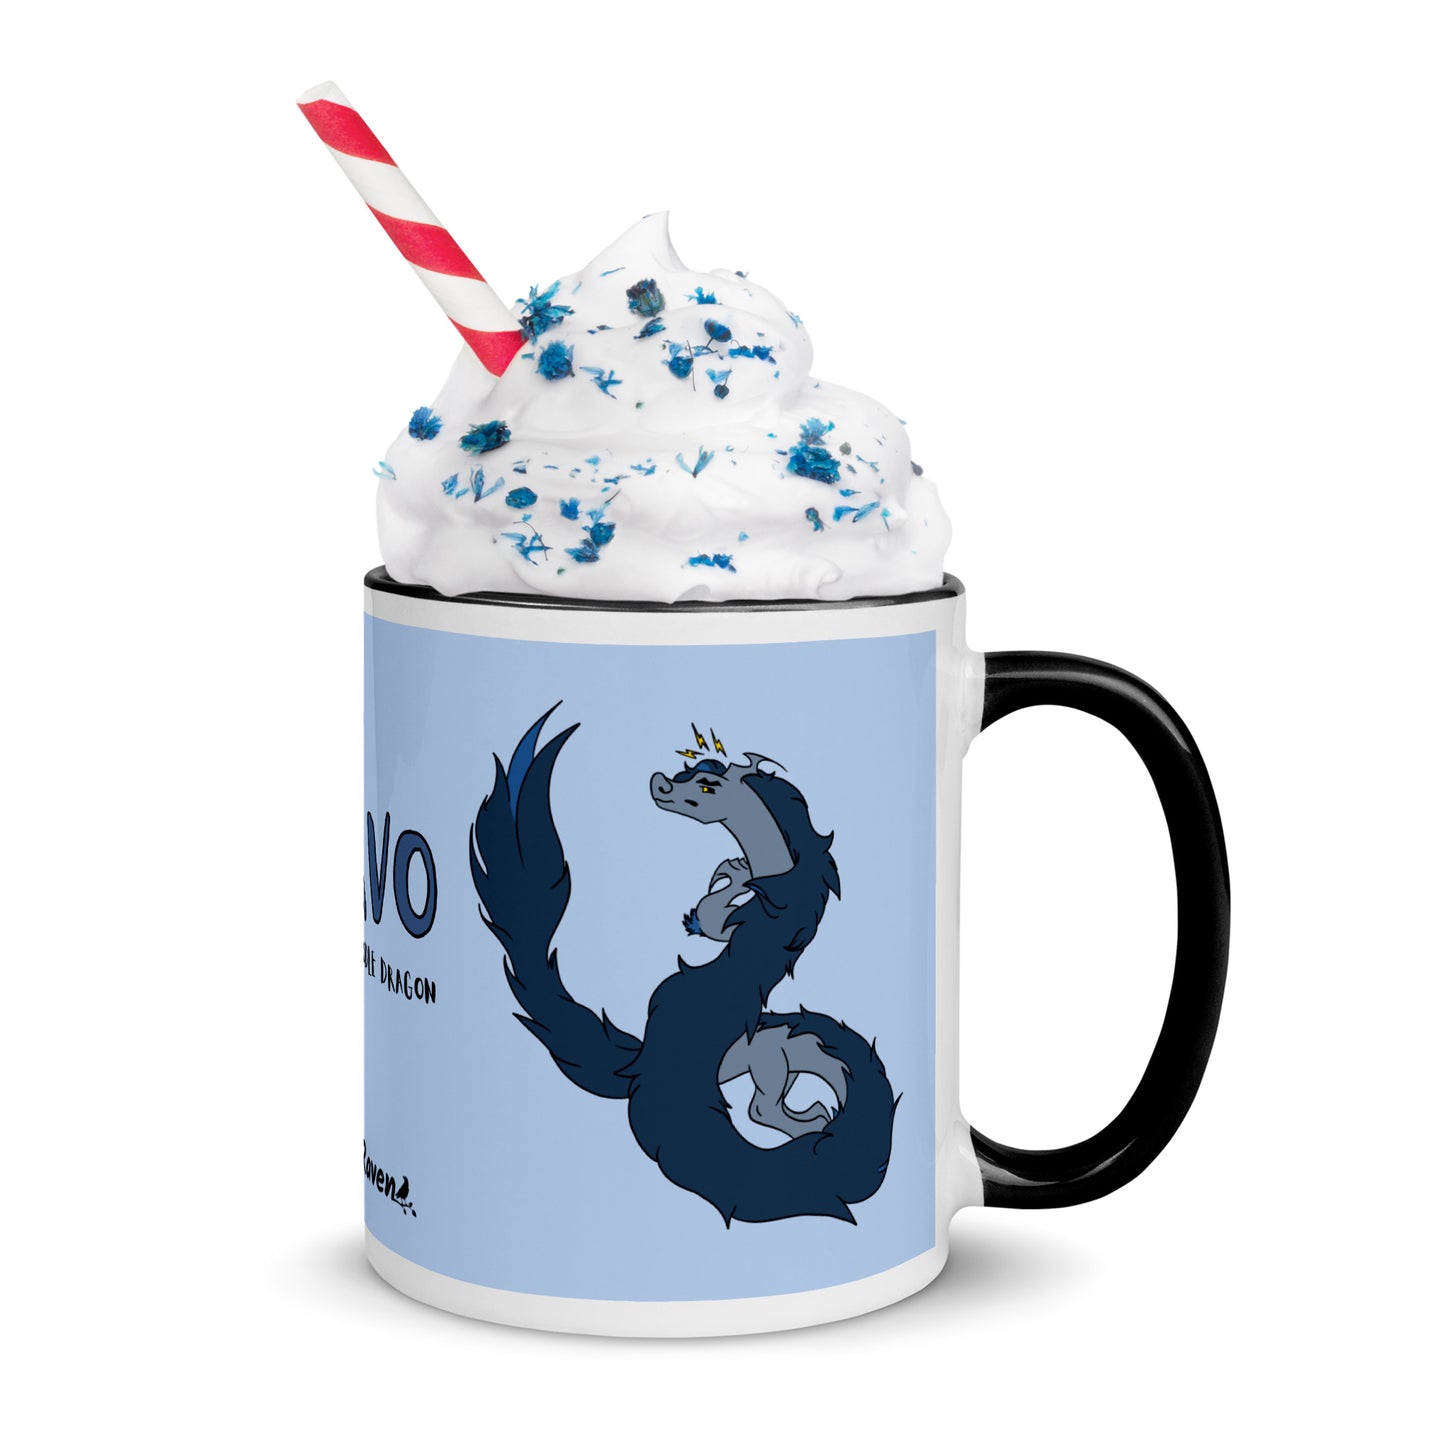 11 ounce ceramic mug featuring a double-sided image of angry Korvo the Fuzzy Noodle dragon against a light blue background.  Black inside and handle. Shown with whipped cream, sprinkles and a straw.